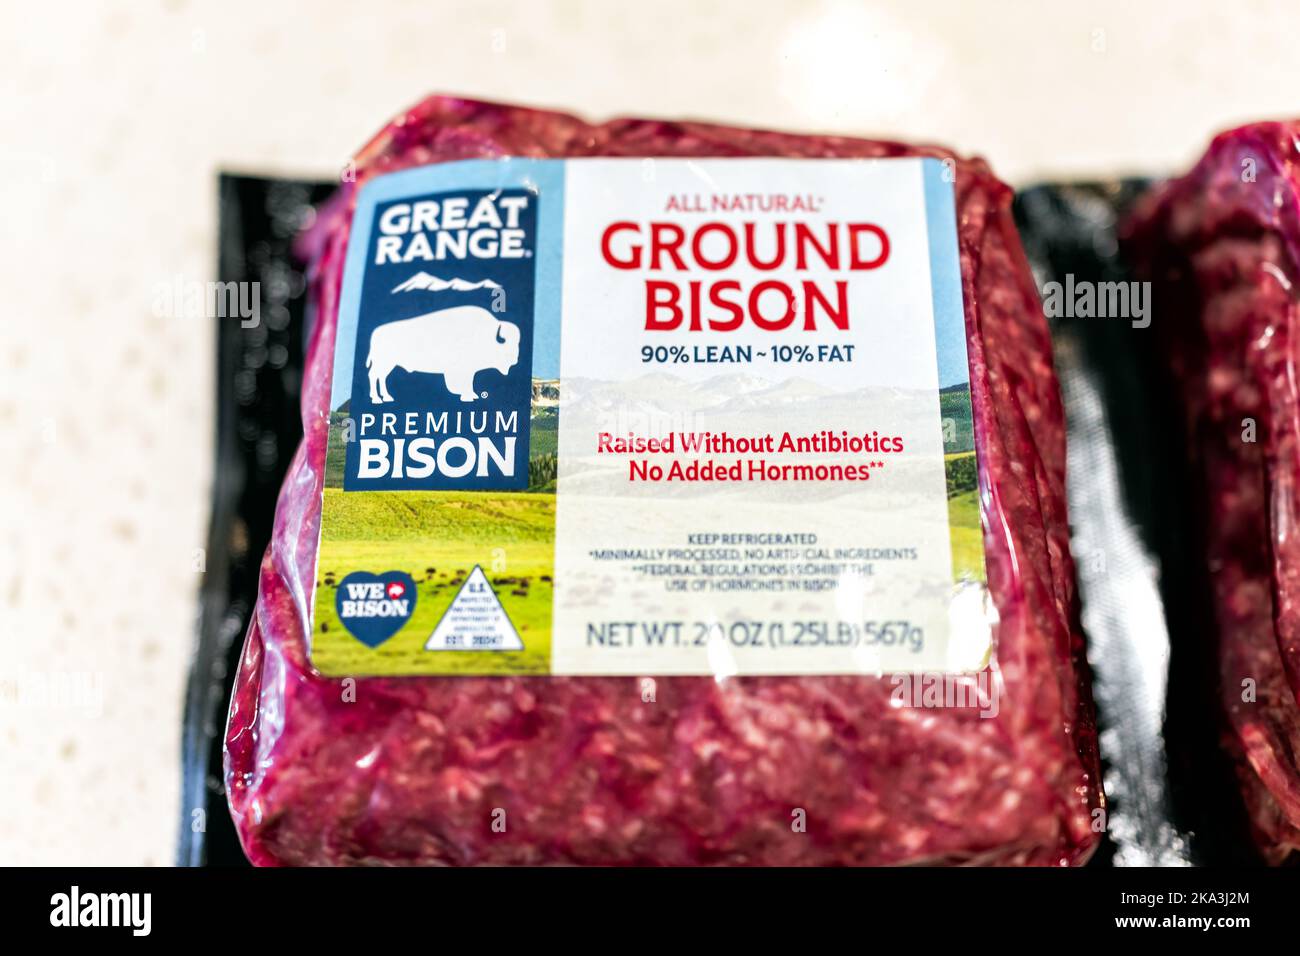 Naples, USA - April 29, 2022: Macro closeup of fresh red raw uncooked packaged ground bison meat from Great Range brand company grass-fed raised witho Stock Photo